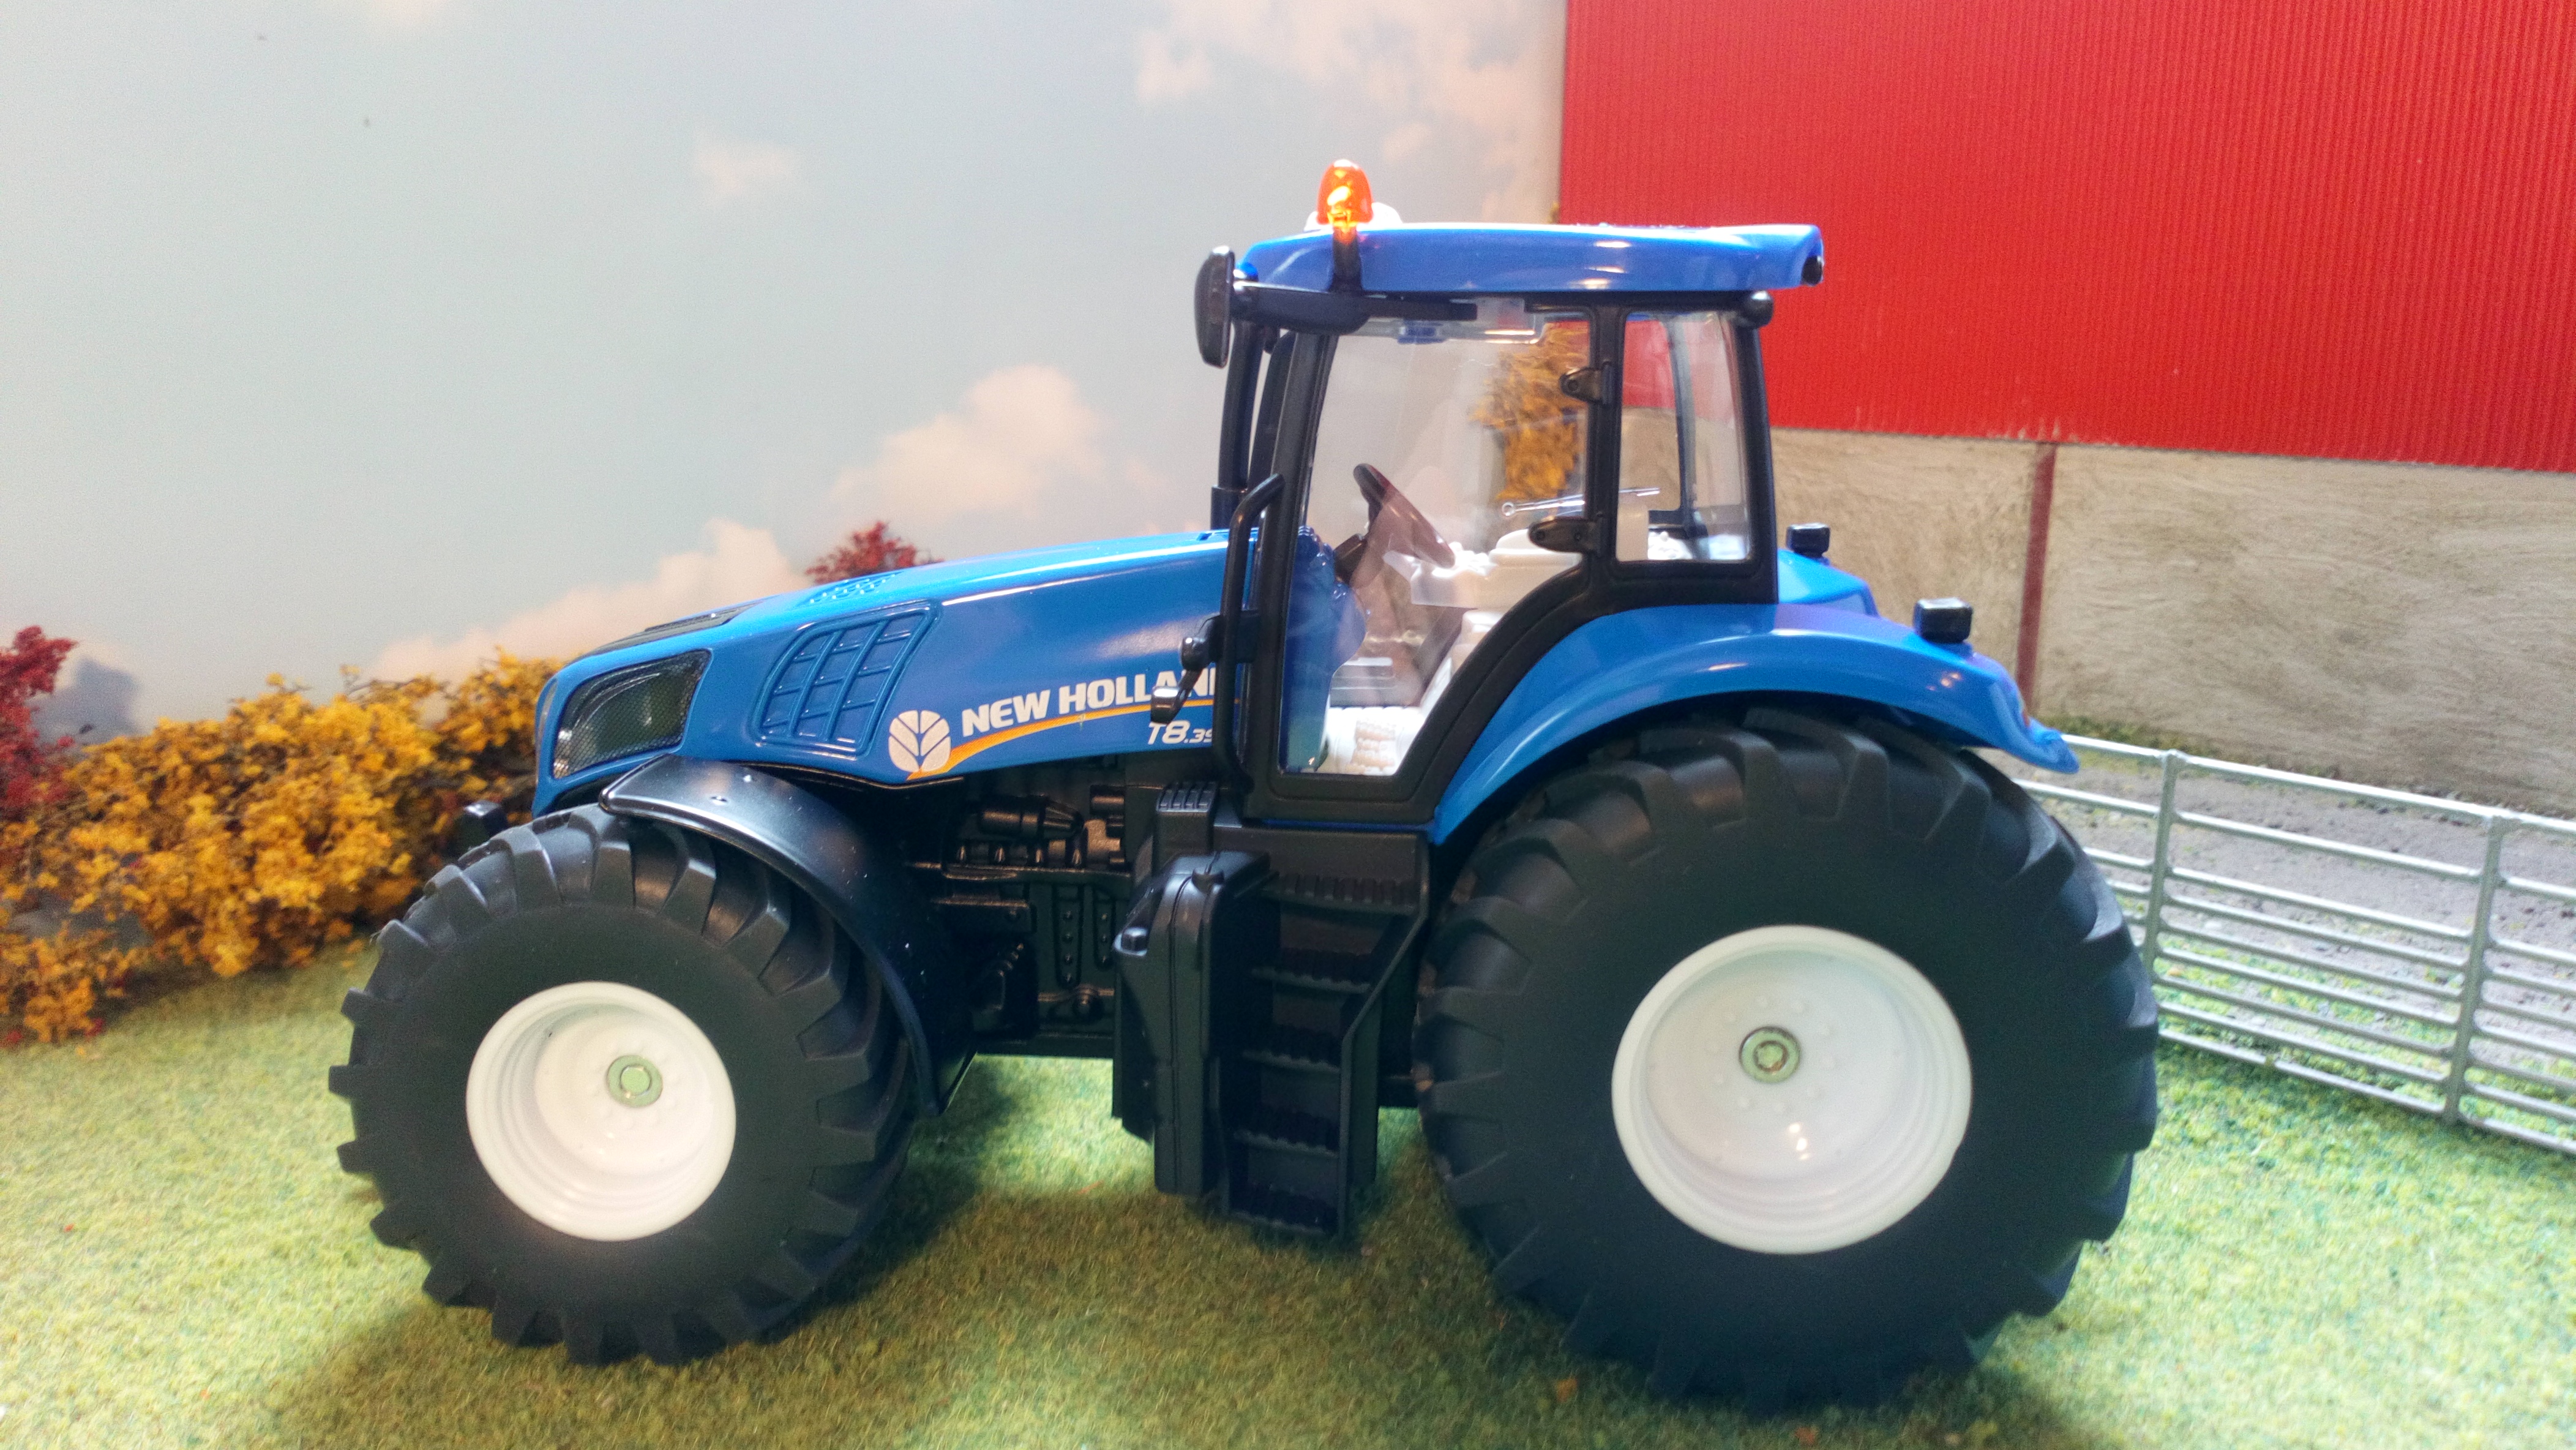 1012 BA Siku 1:82 Scale Toy New Holland T8.390 Farm Tractor  New Boxed - 